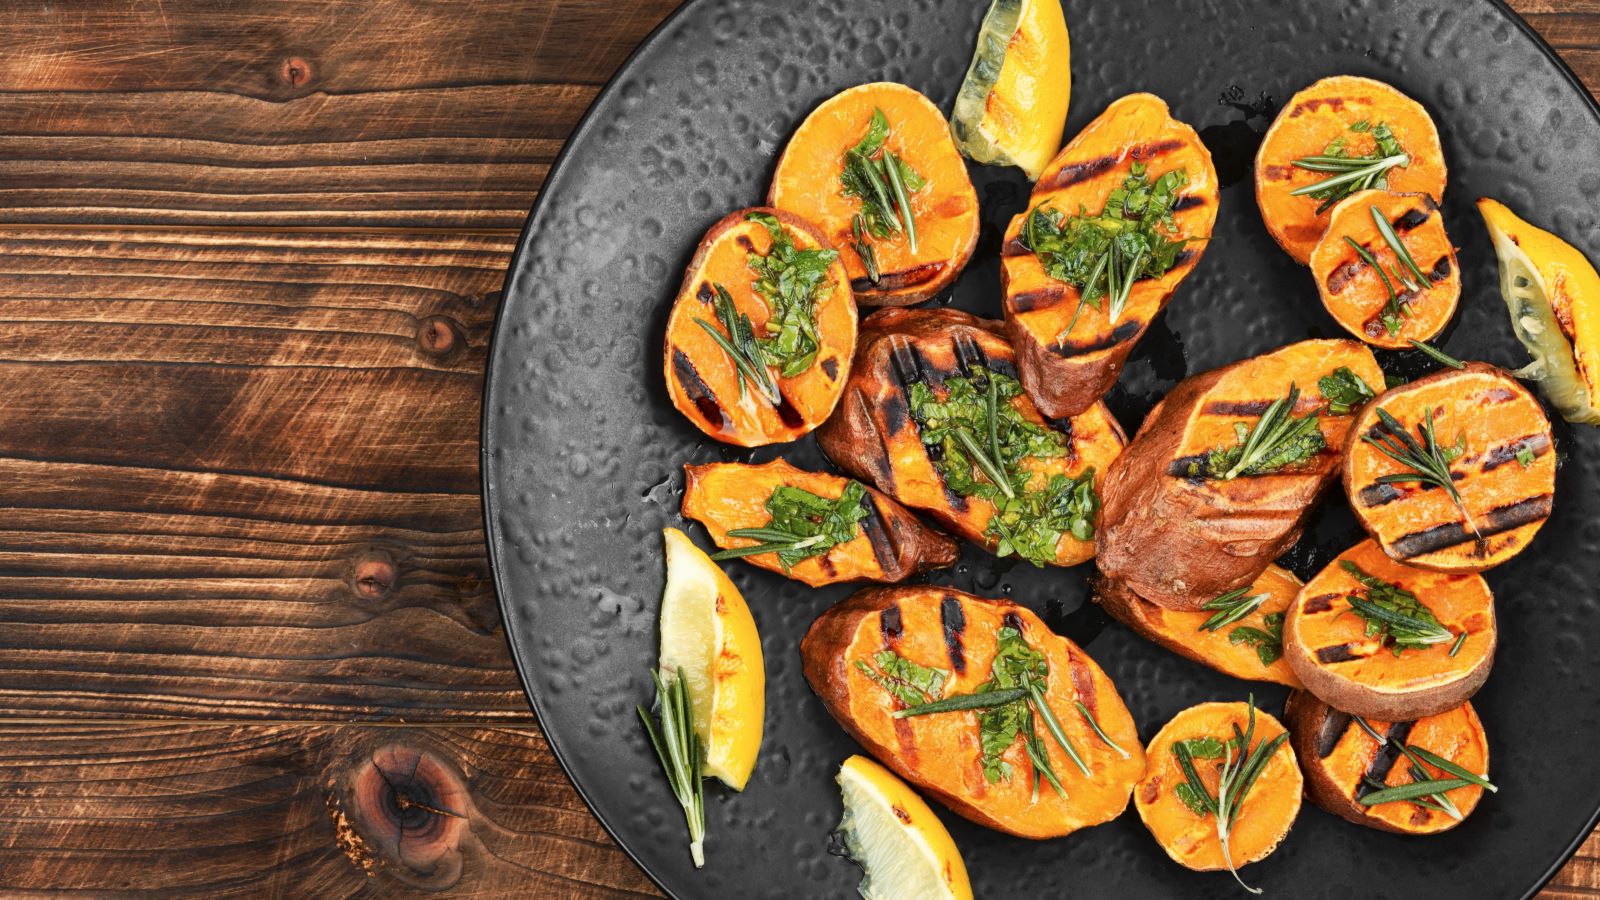 Sweet potatoes can always be counted on for a crowd-pleasing side dish. But are there other reasons to get more sweet potatoes in your diet?